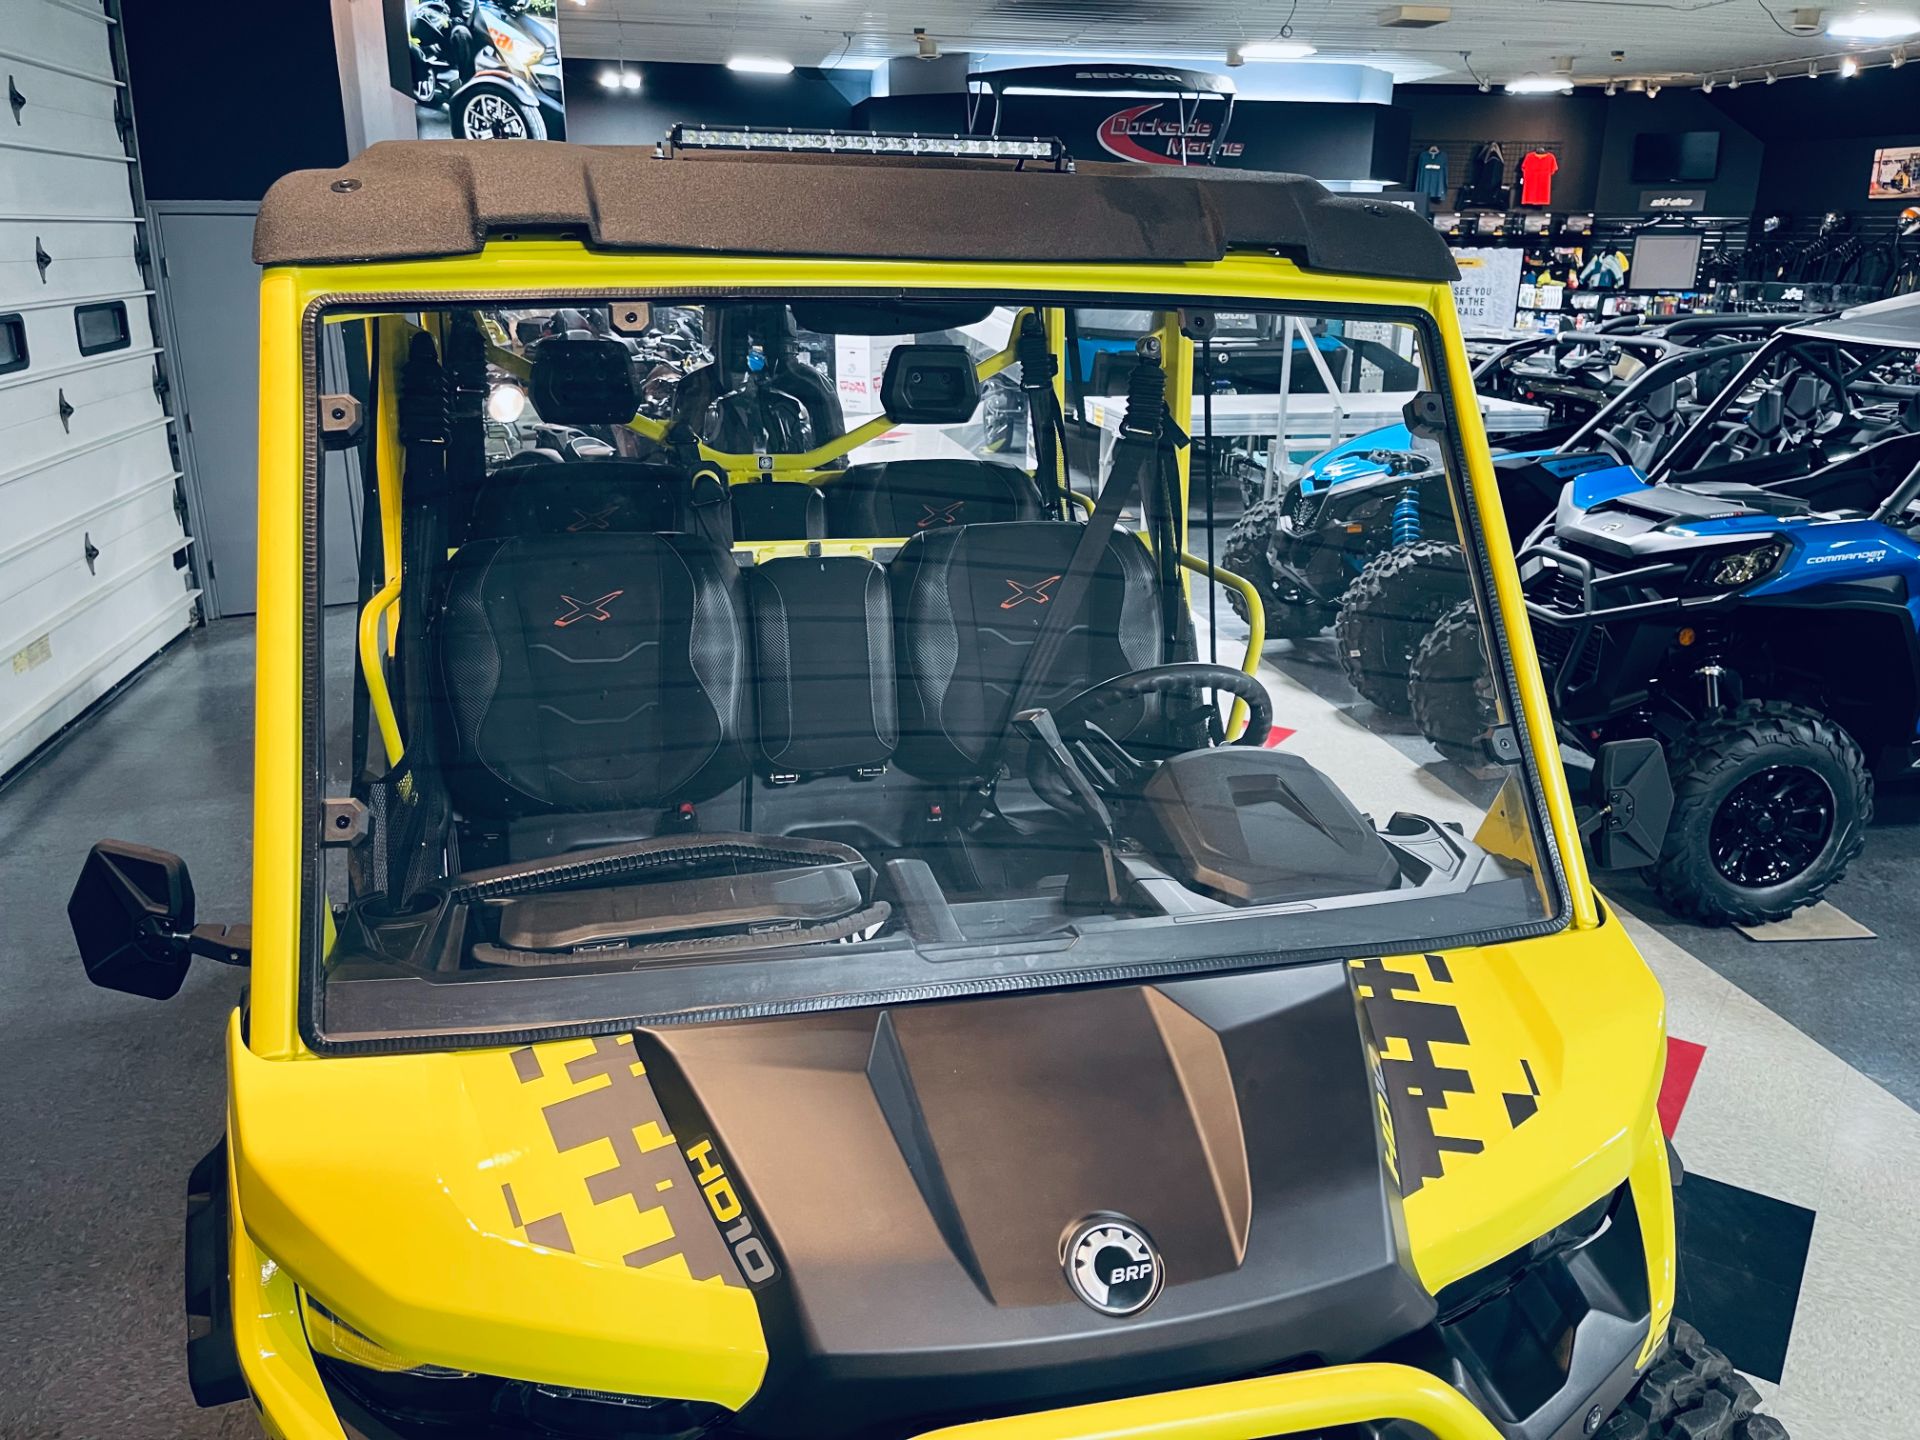 2019 Can-Am Defender Max X mr HD10 in Wilmington, Illinois - Photo 10